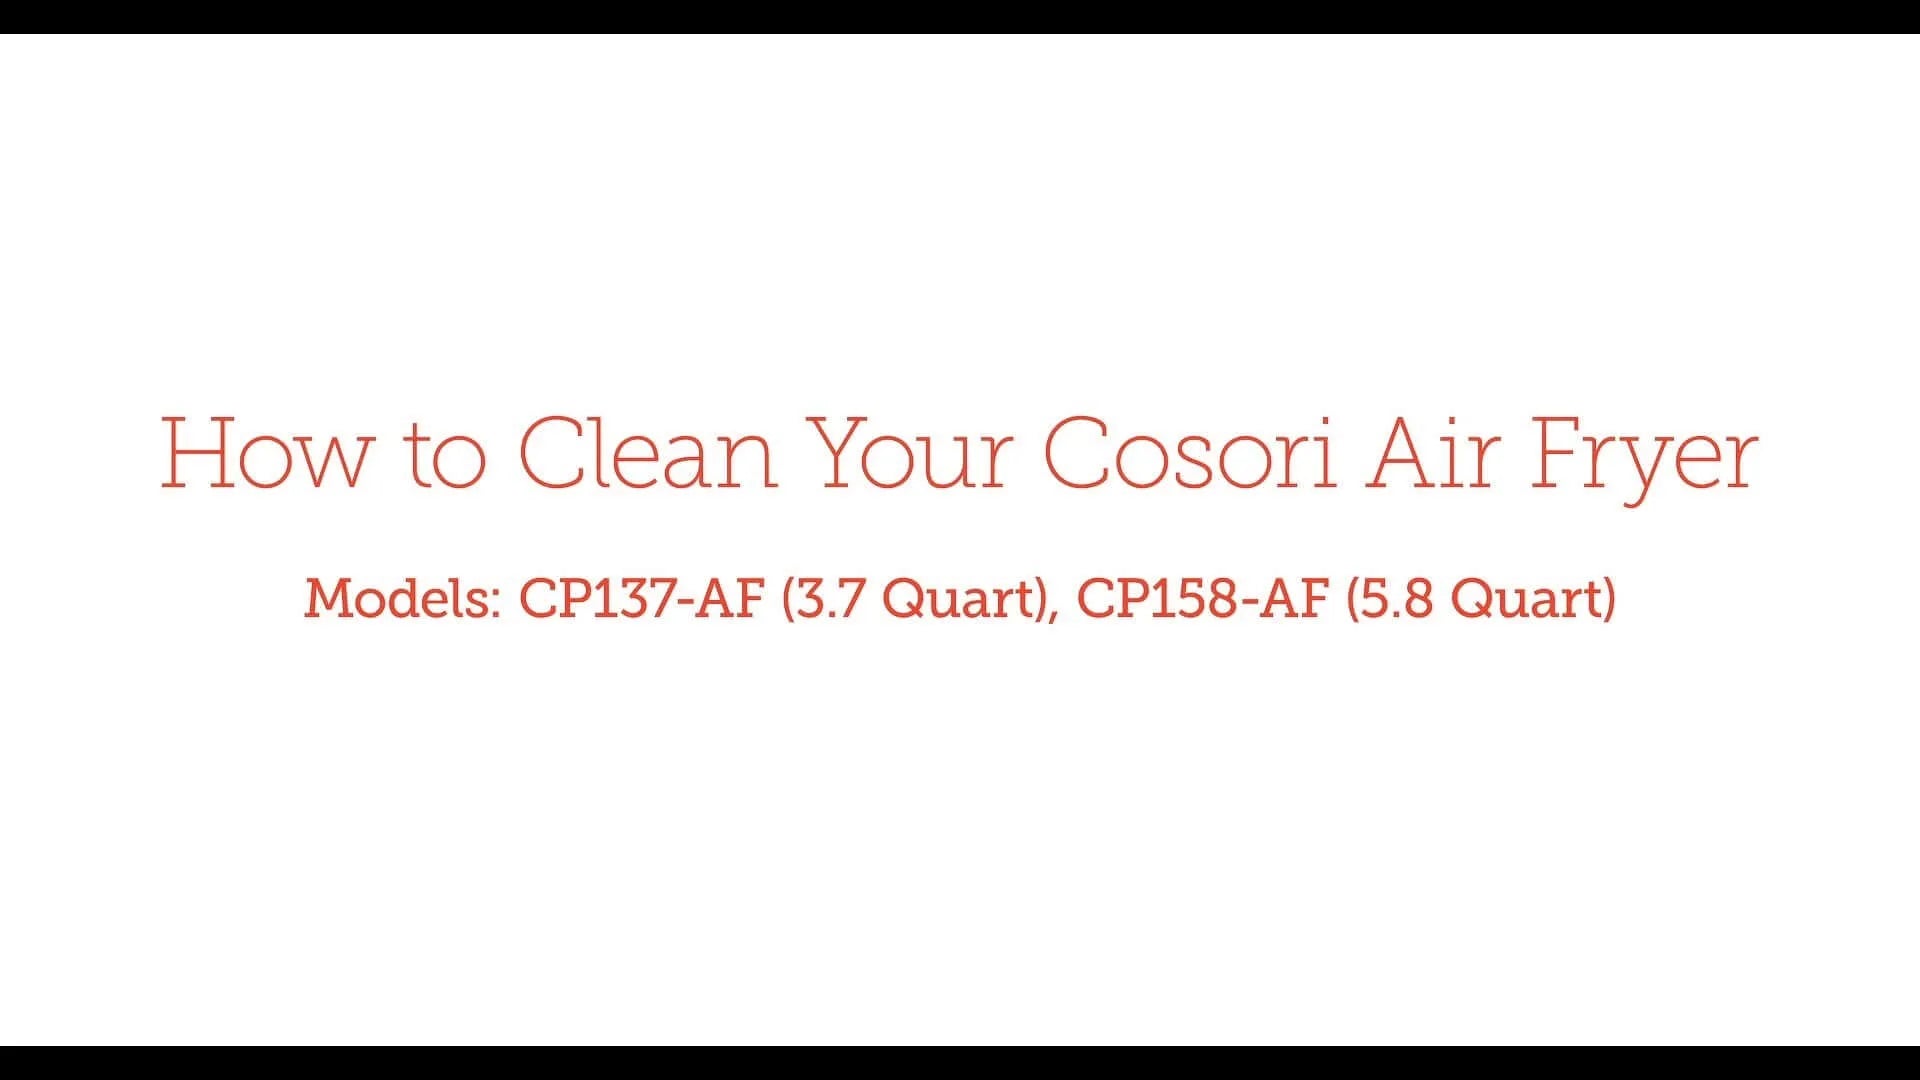 How to clean your Cosori Air Fryer